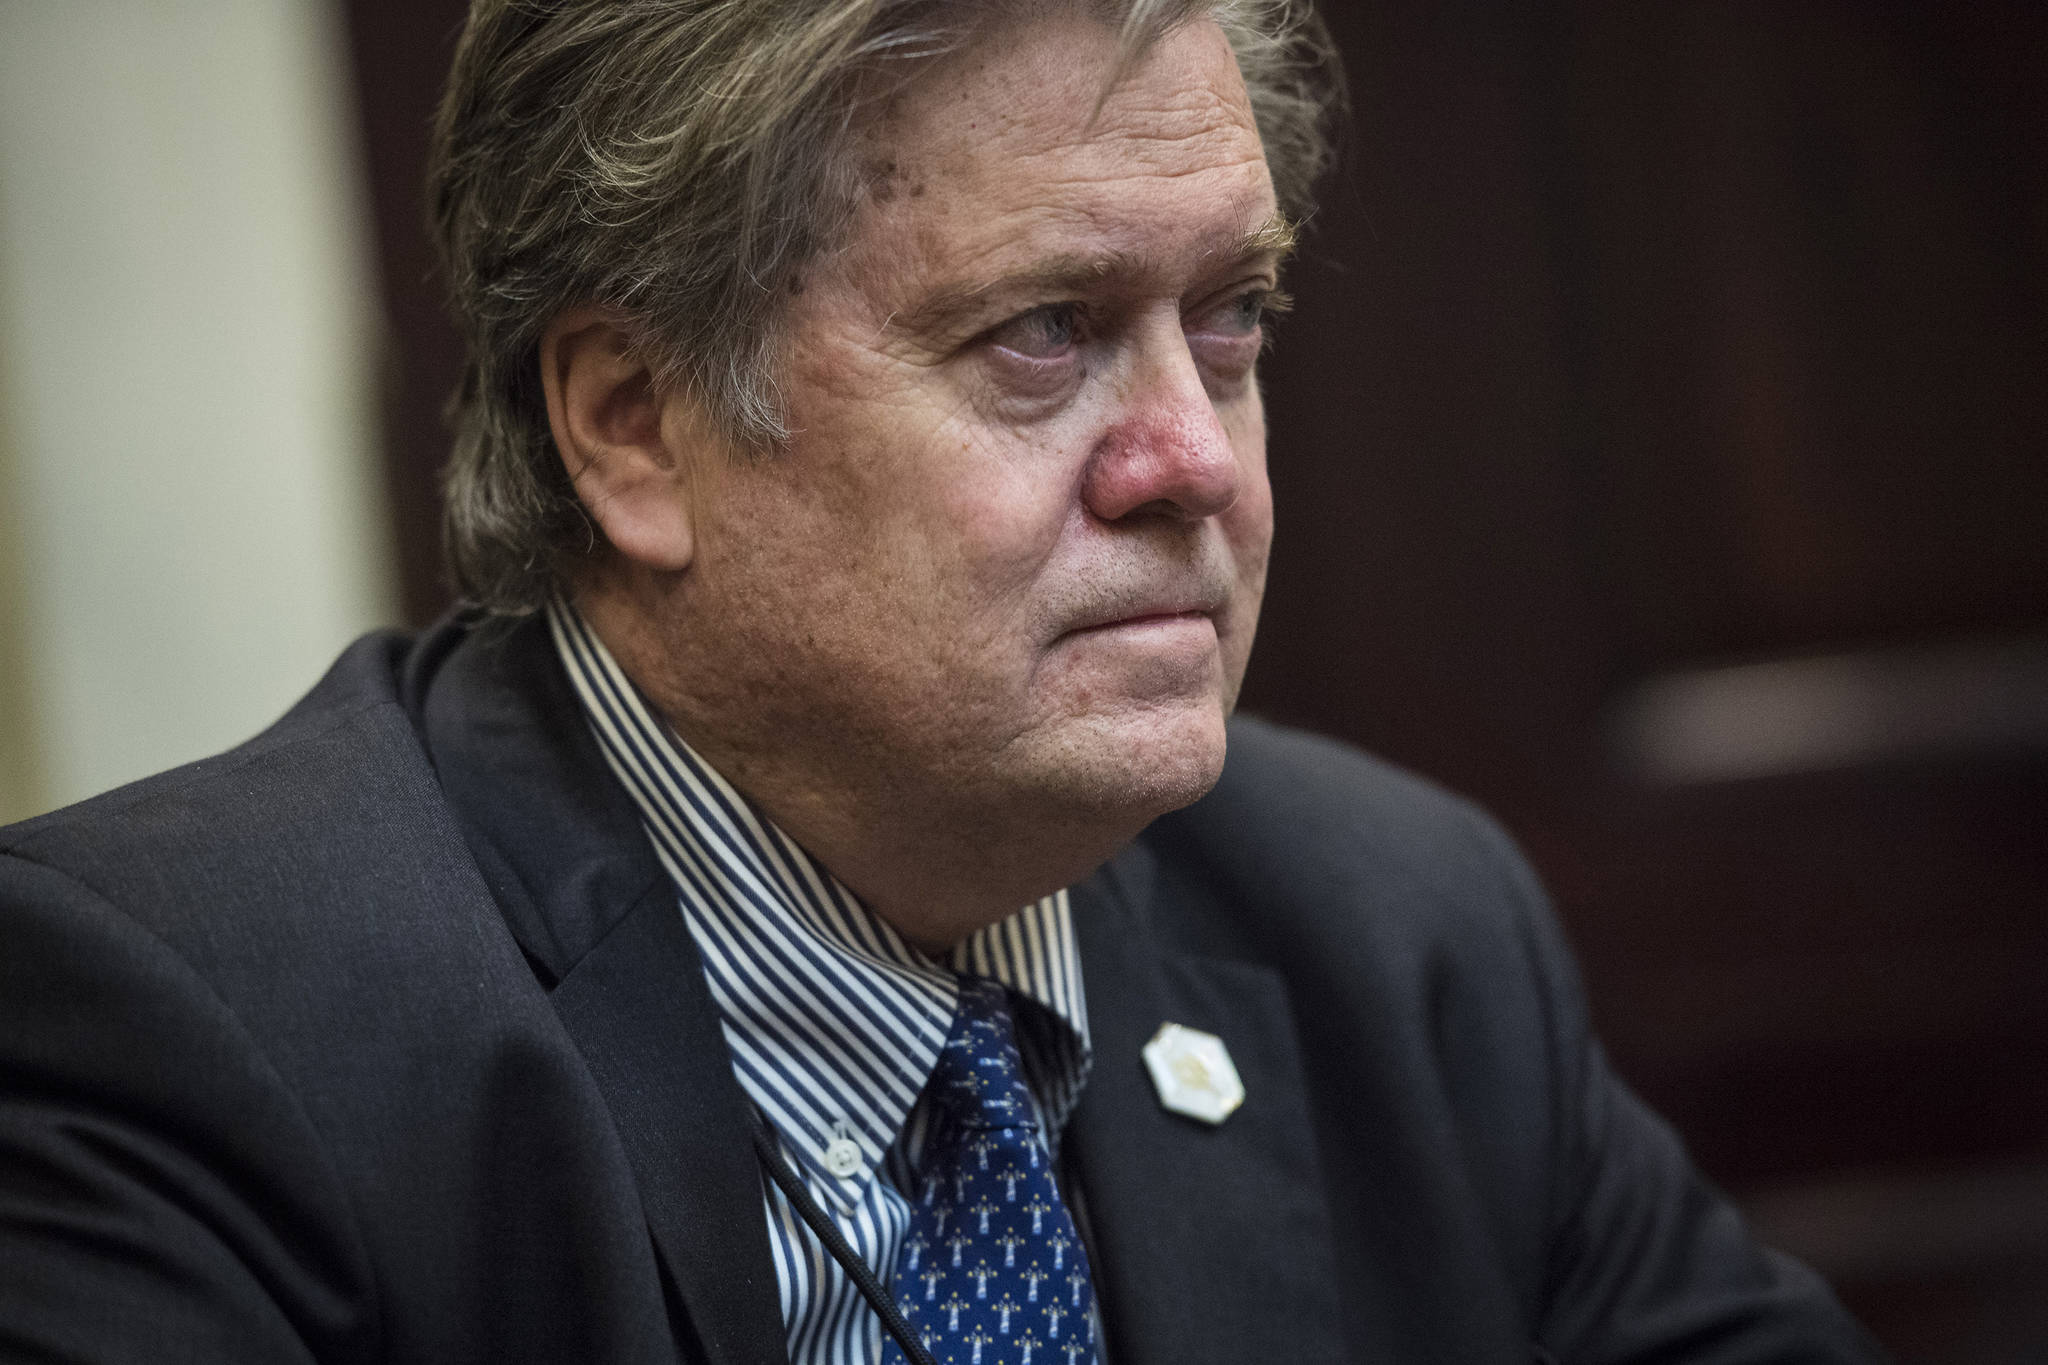 12 charged after protest of debate featuring ex-Trump aide Steve Bannon